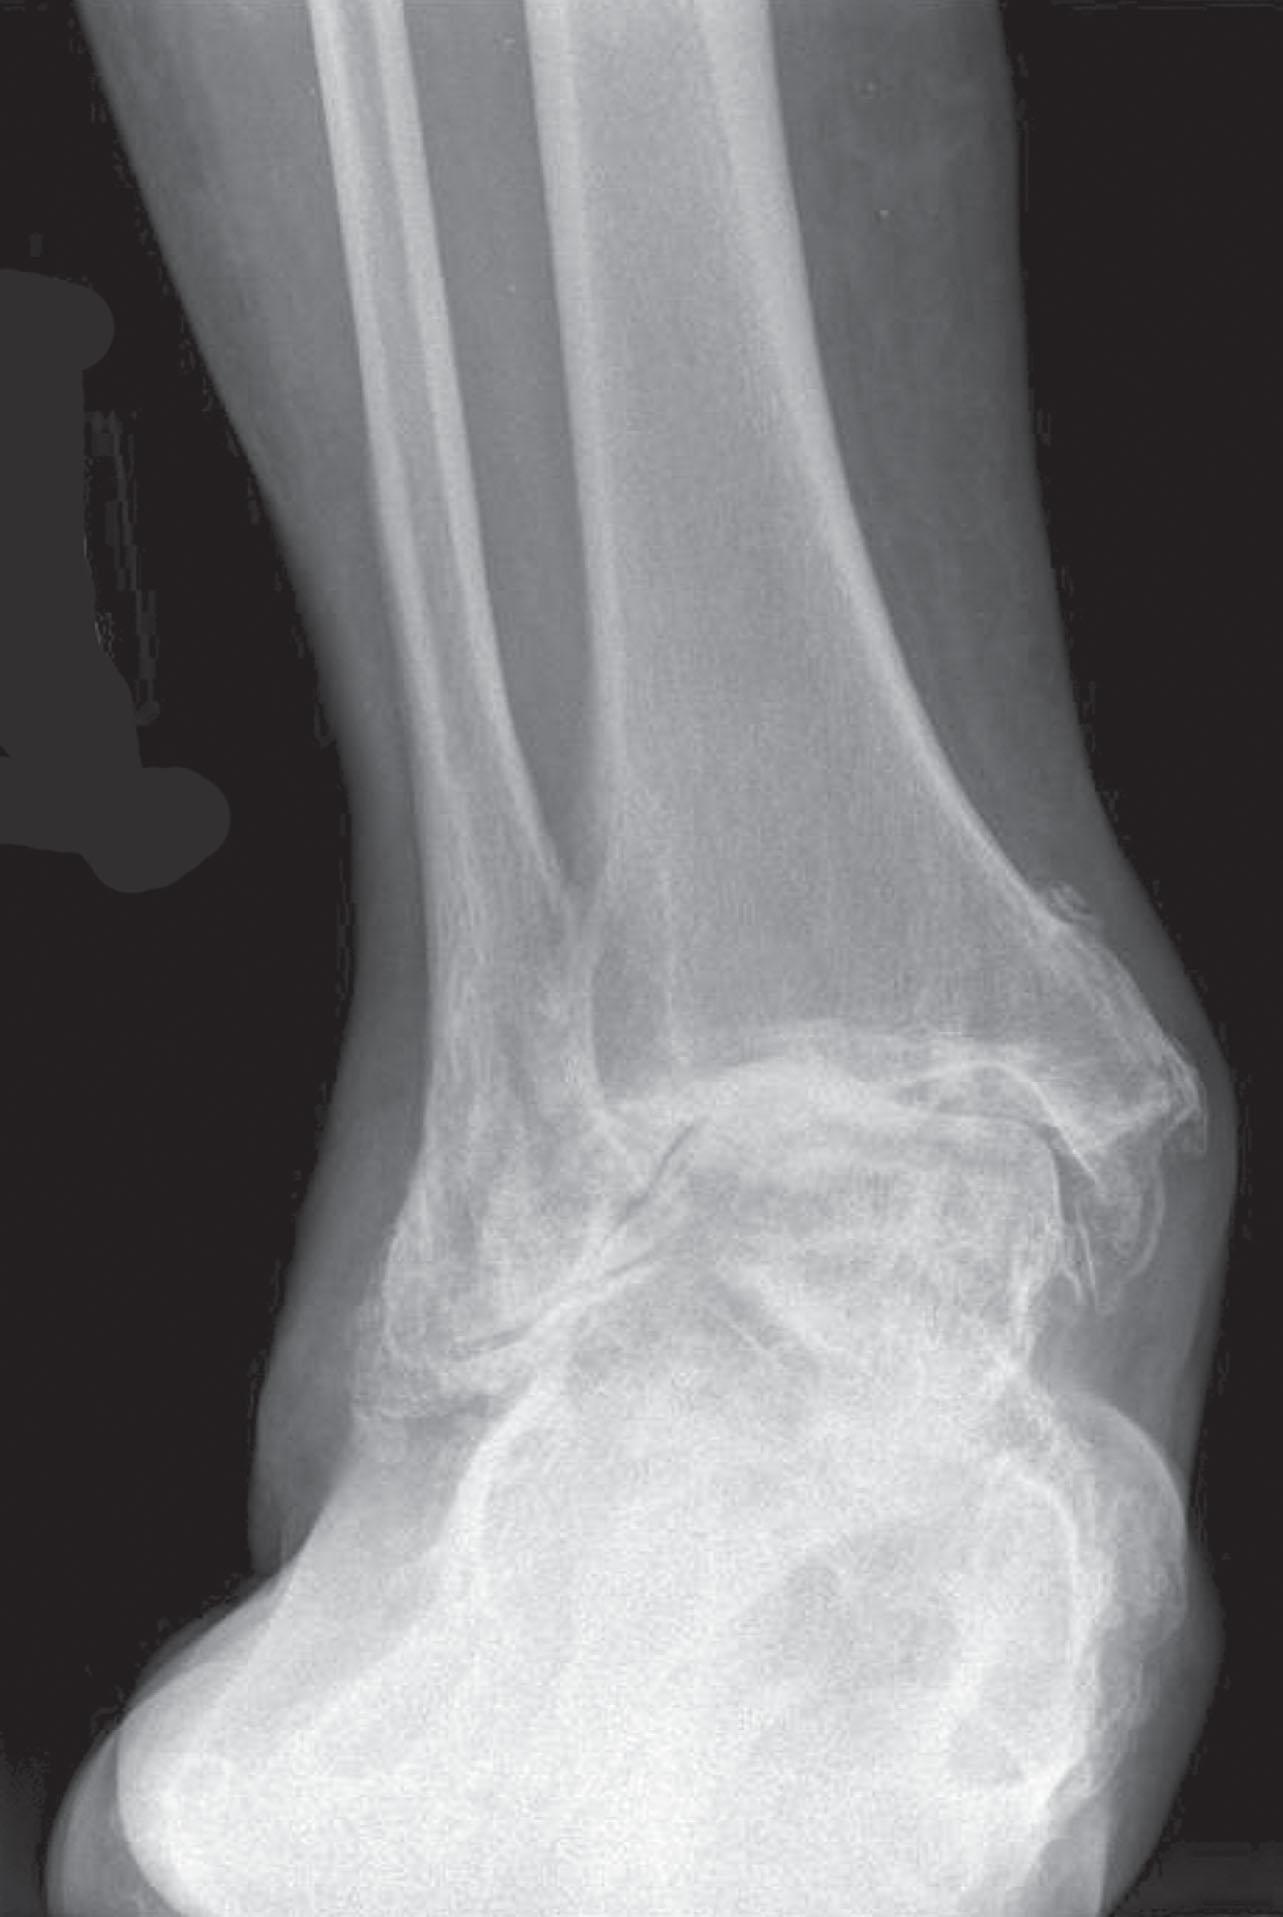 Fig. 29-11, Anteroposterior radiograph of a patient with valgus incongruent ankle arthritis secondary to progressive collapsing foot deformity.